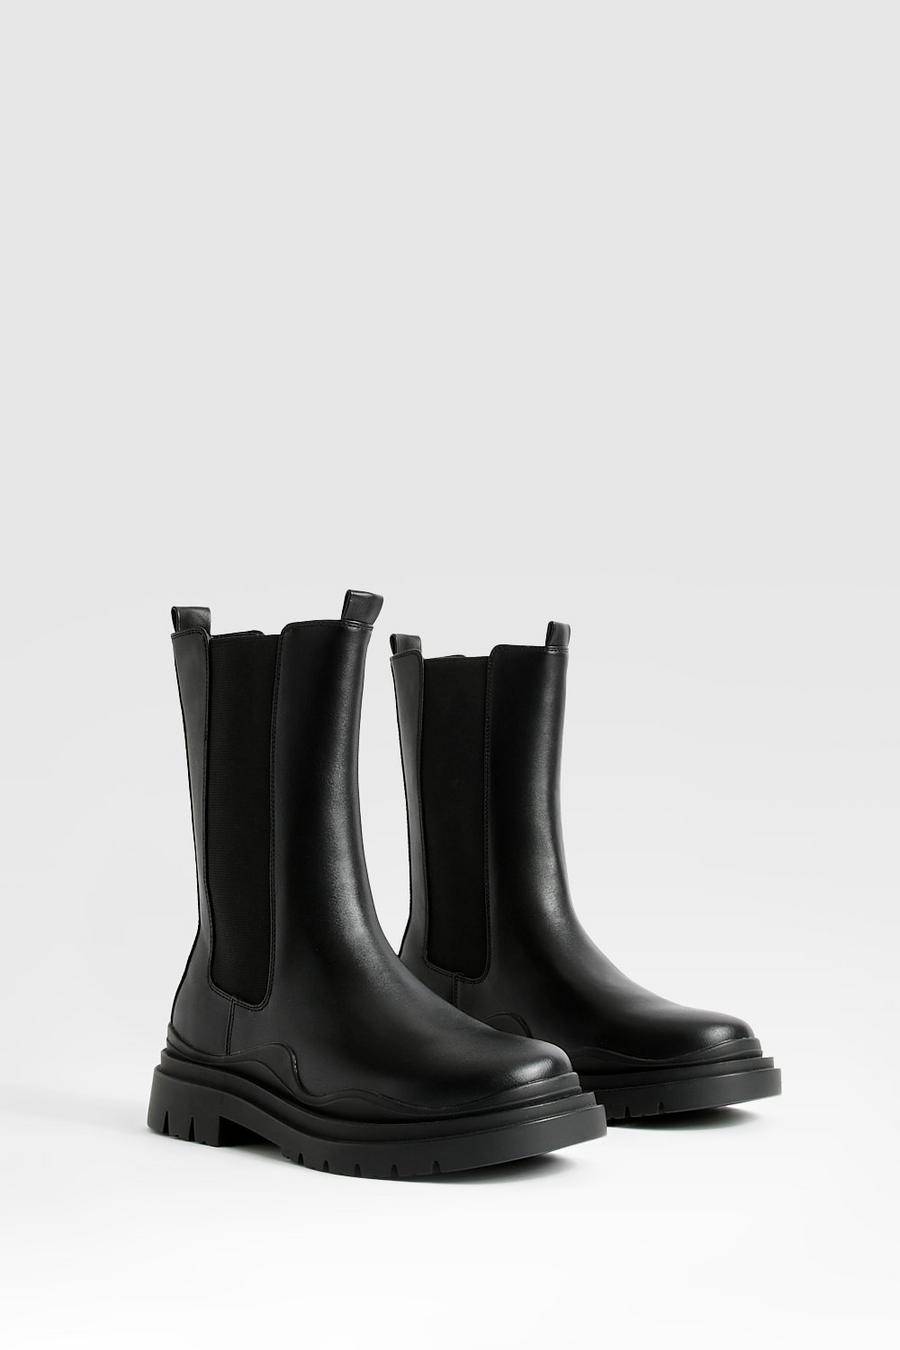 Black Wide Width Calf Height Chelsea Boots